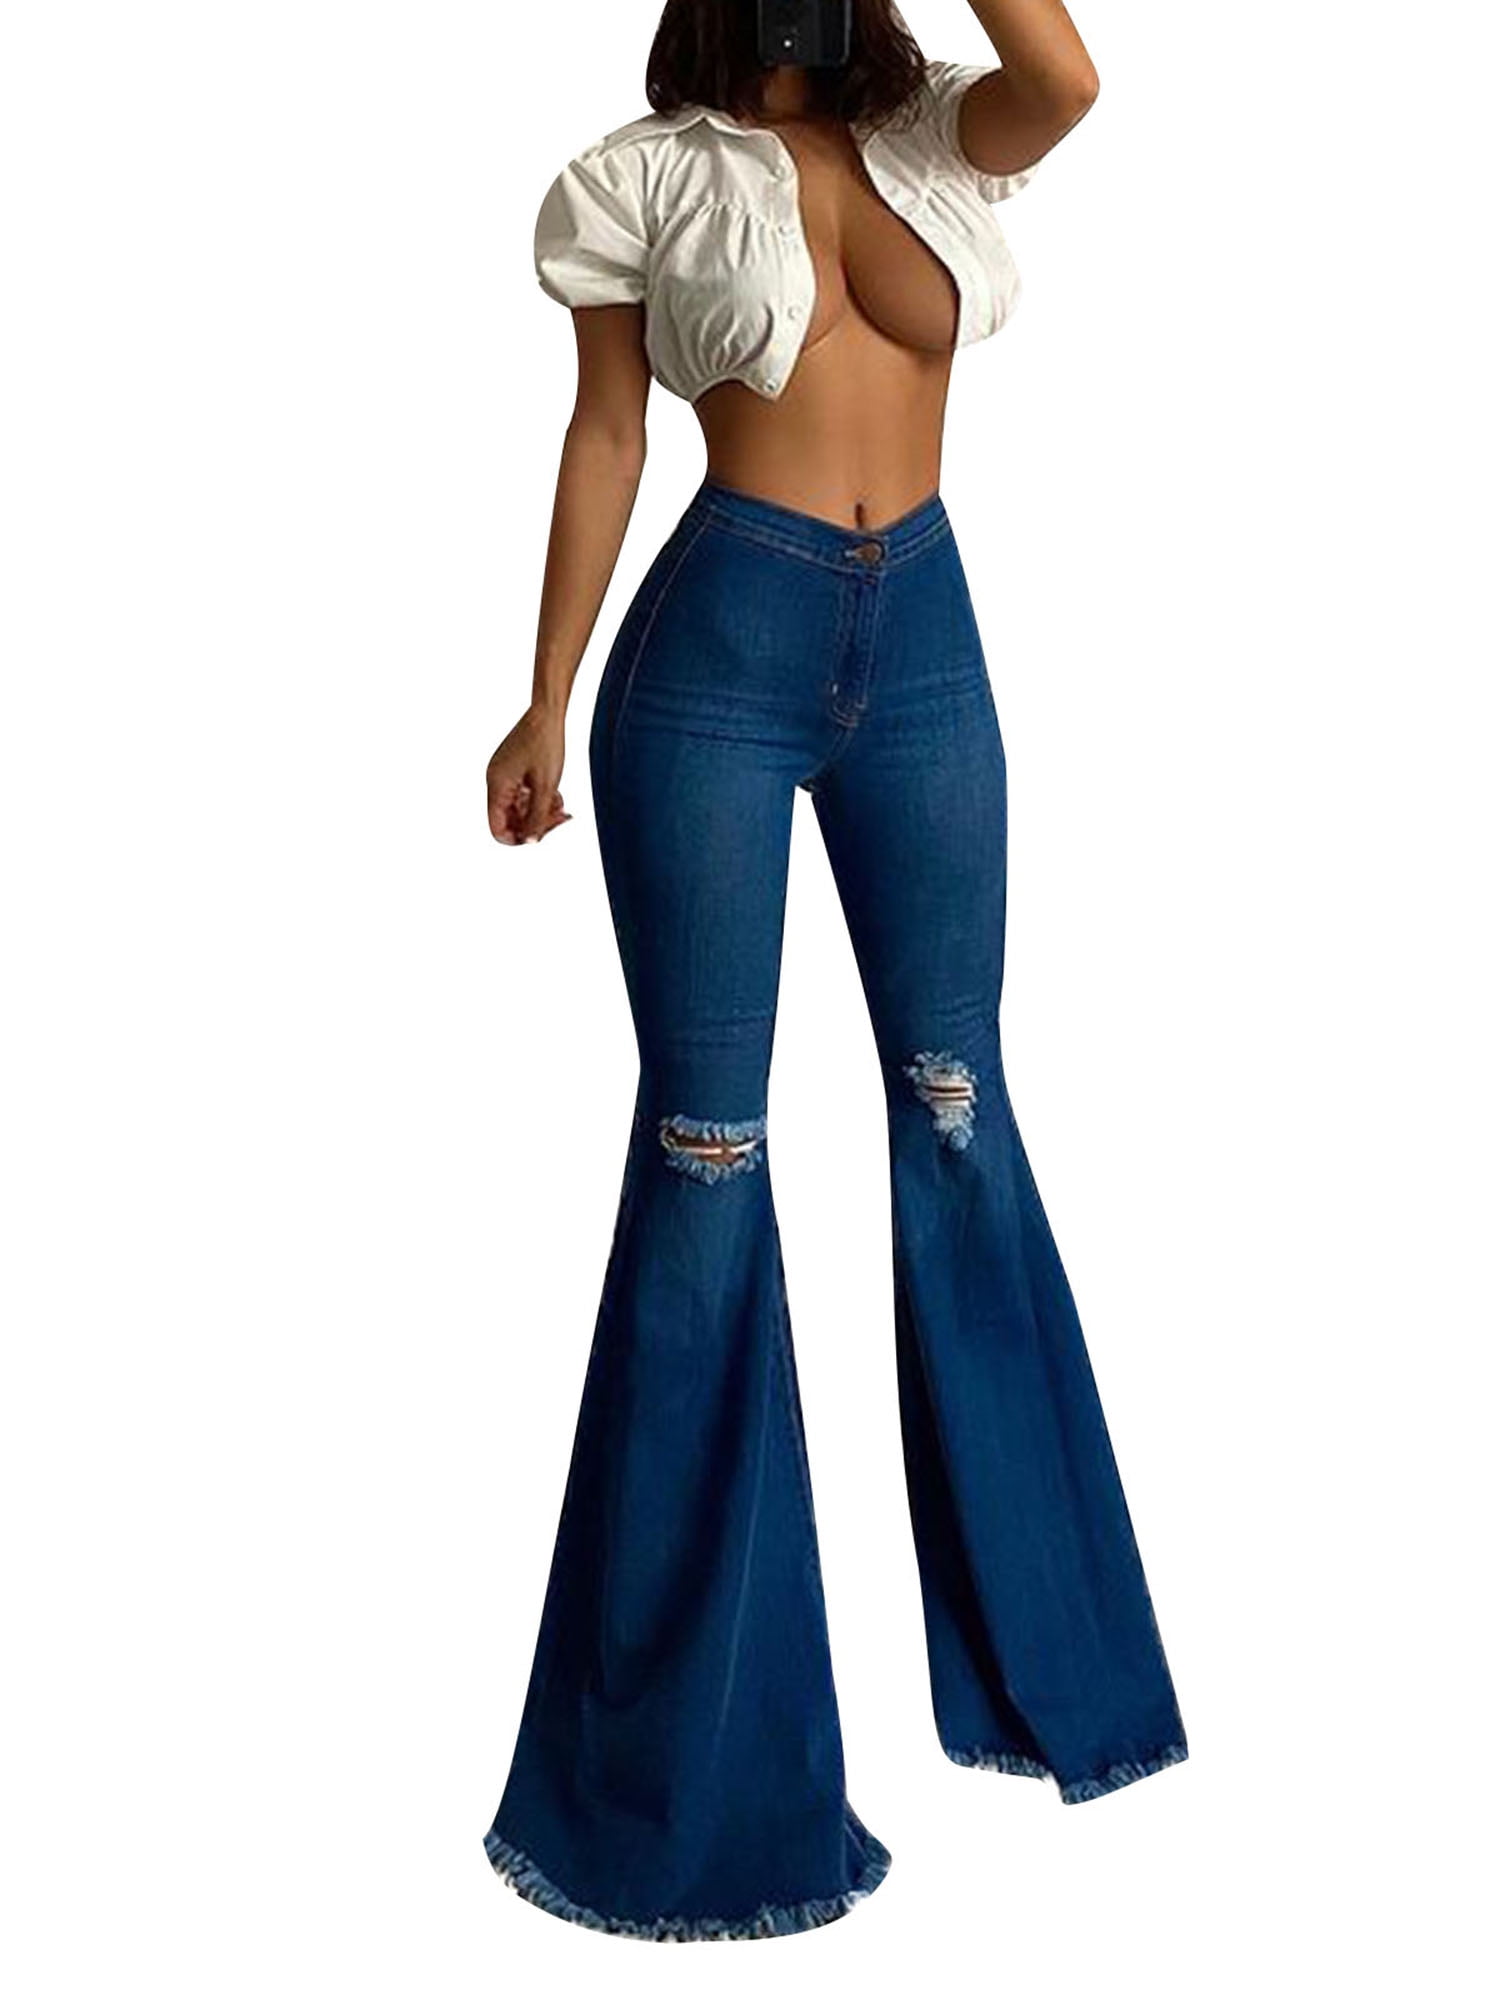 Erepe Elastic Ripped Hole Classic Denim Bell Bottom Jeans for Women High Waist Y2k Streetwear Fitted Flared Denim Pants 